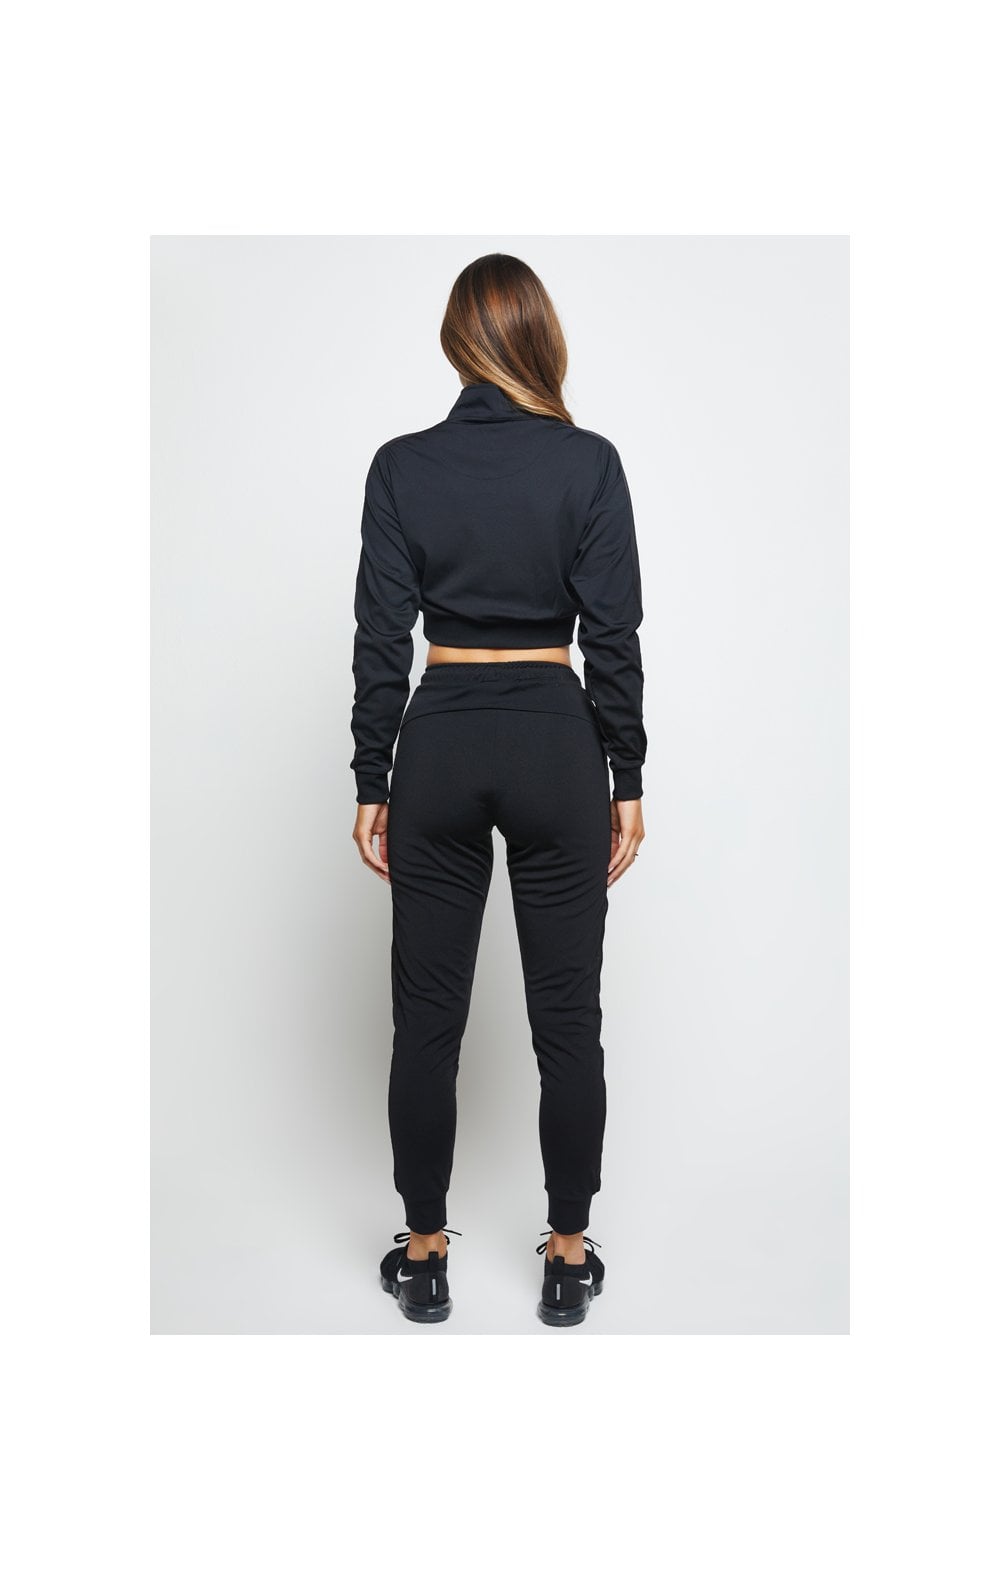 Load image into Gallery viewer, SikSilk Fusion Track Top - Jet Black (3)